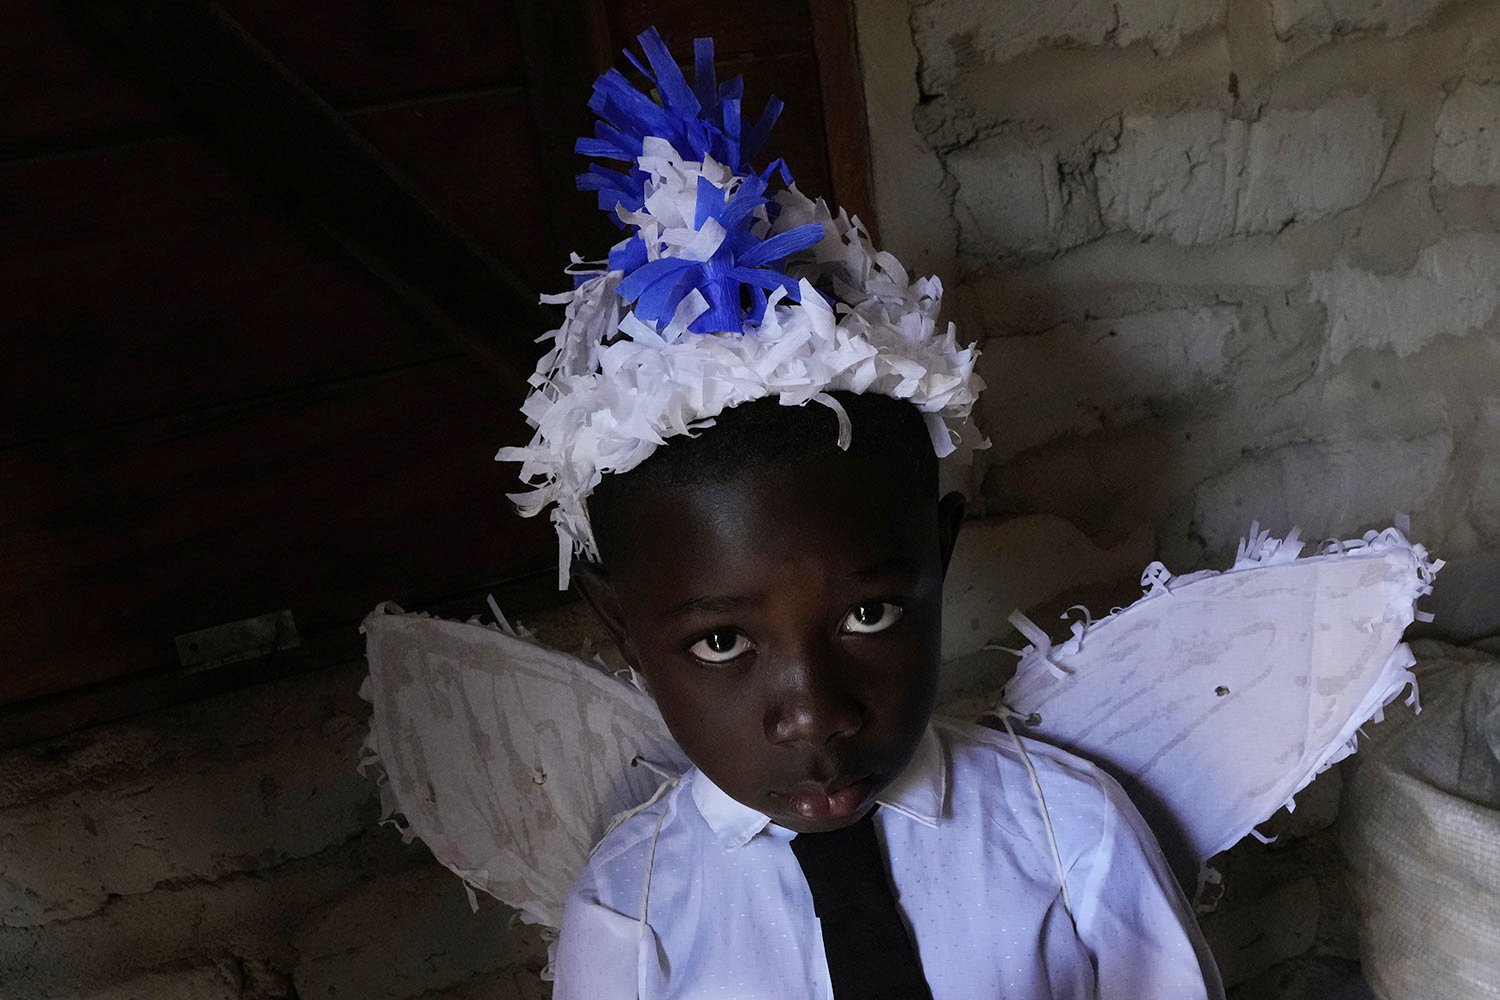  A youth in an angel costume poses for a photo at the end of a week-long pilgrimage honoring the patron saint in Cavalcante, Goias state, Brazil, Aug. 15, 2022. (AP Photo/Eraldo Peres) 